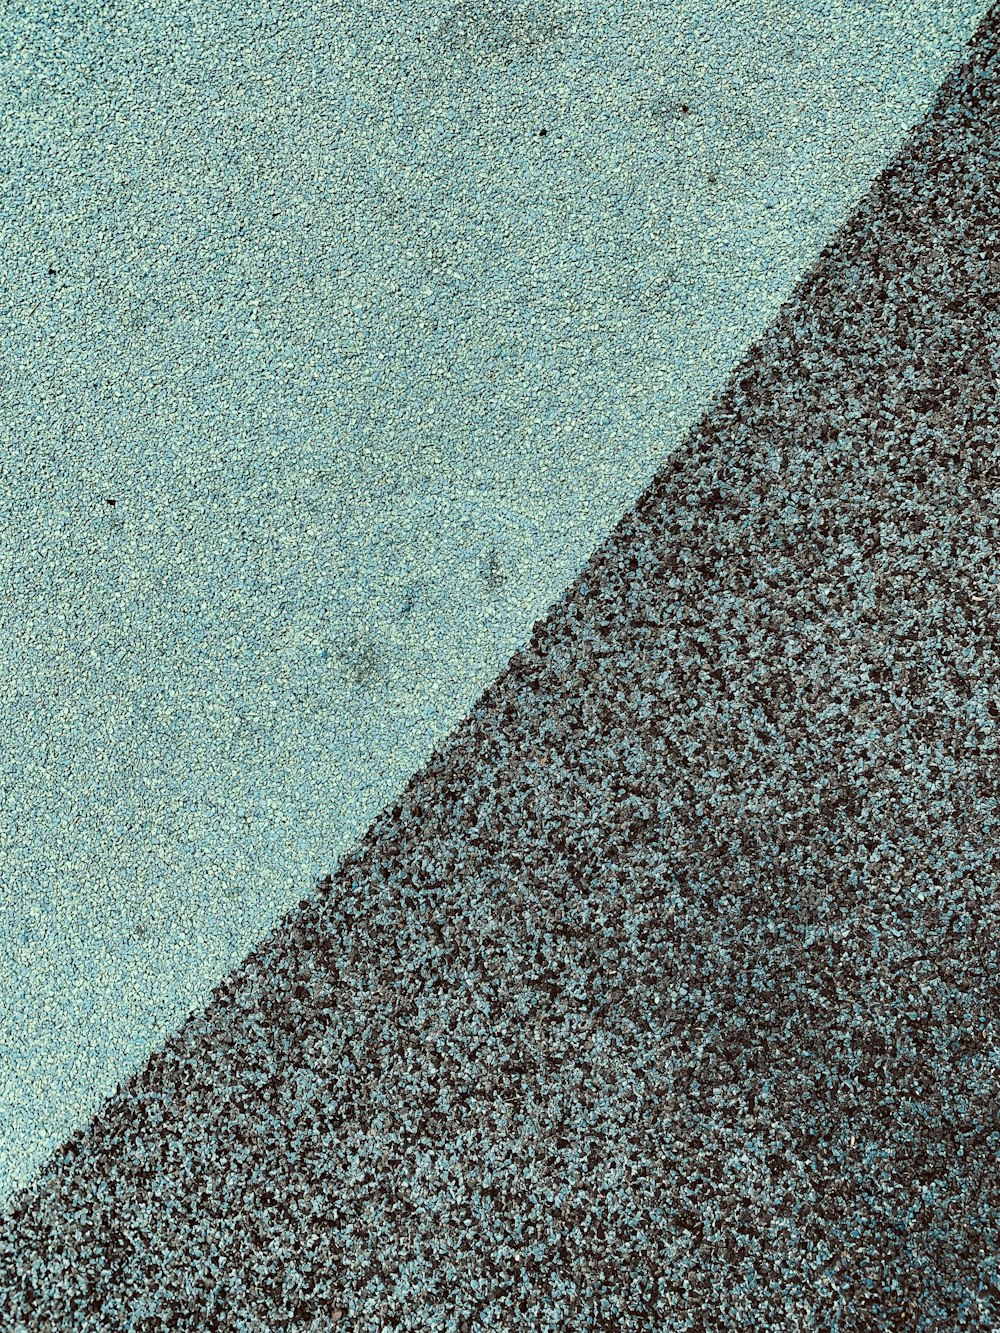 a close up of a blue and brown carpet